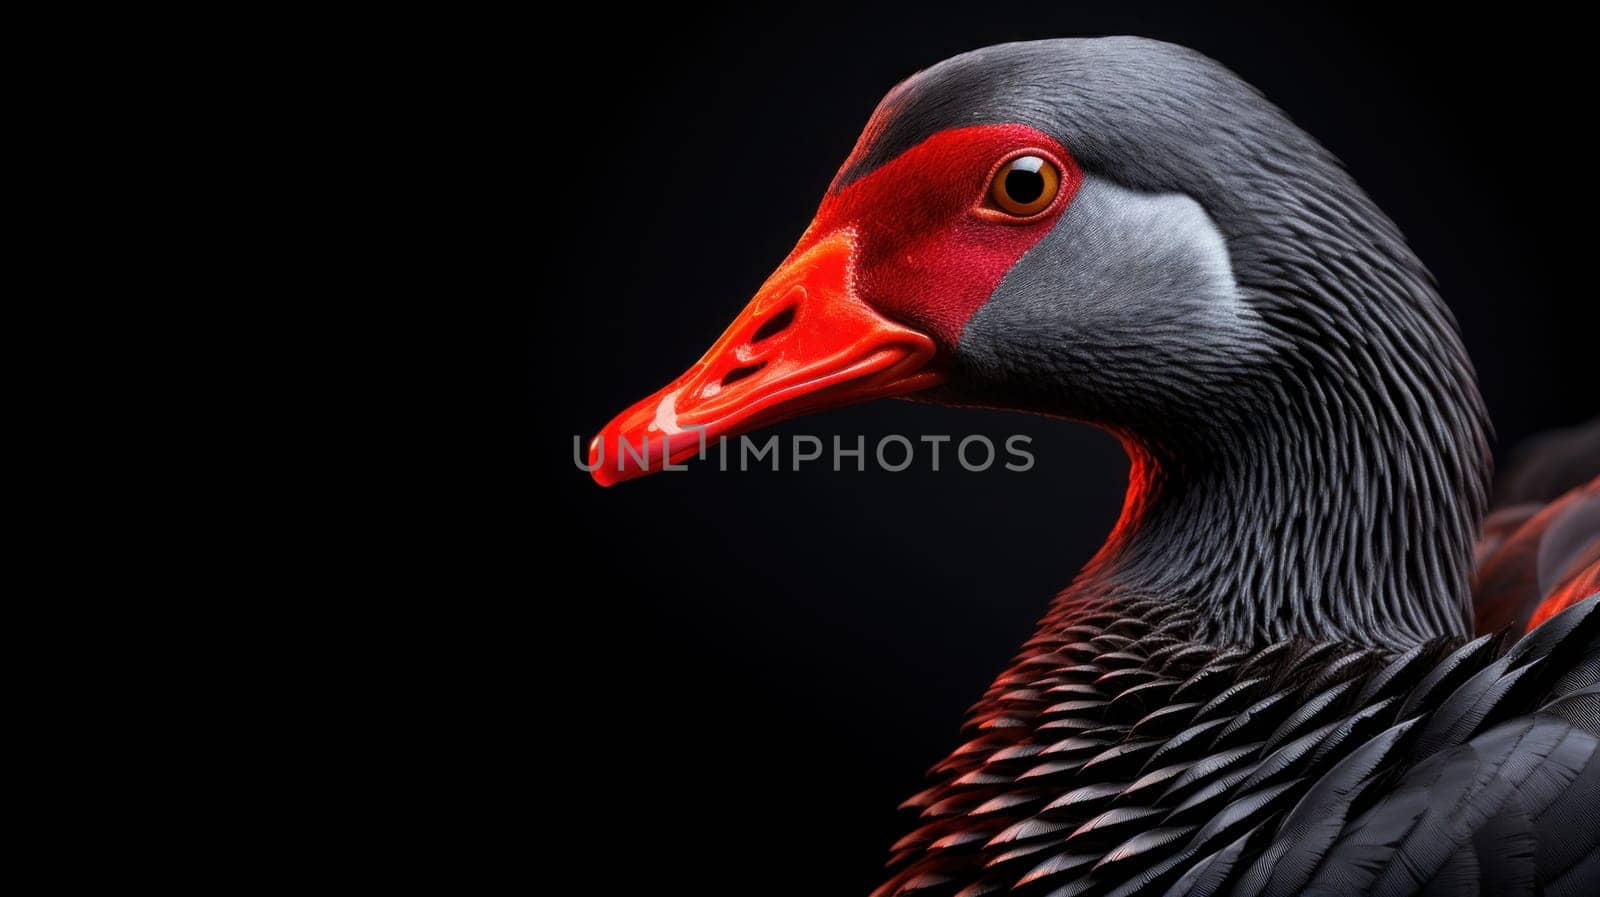 A close up of a bird with red eyes and orange beak